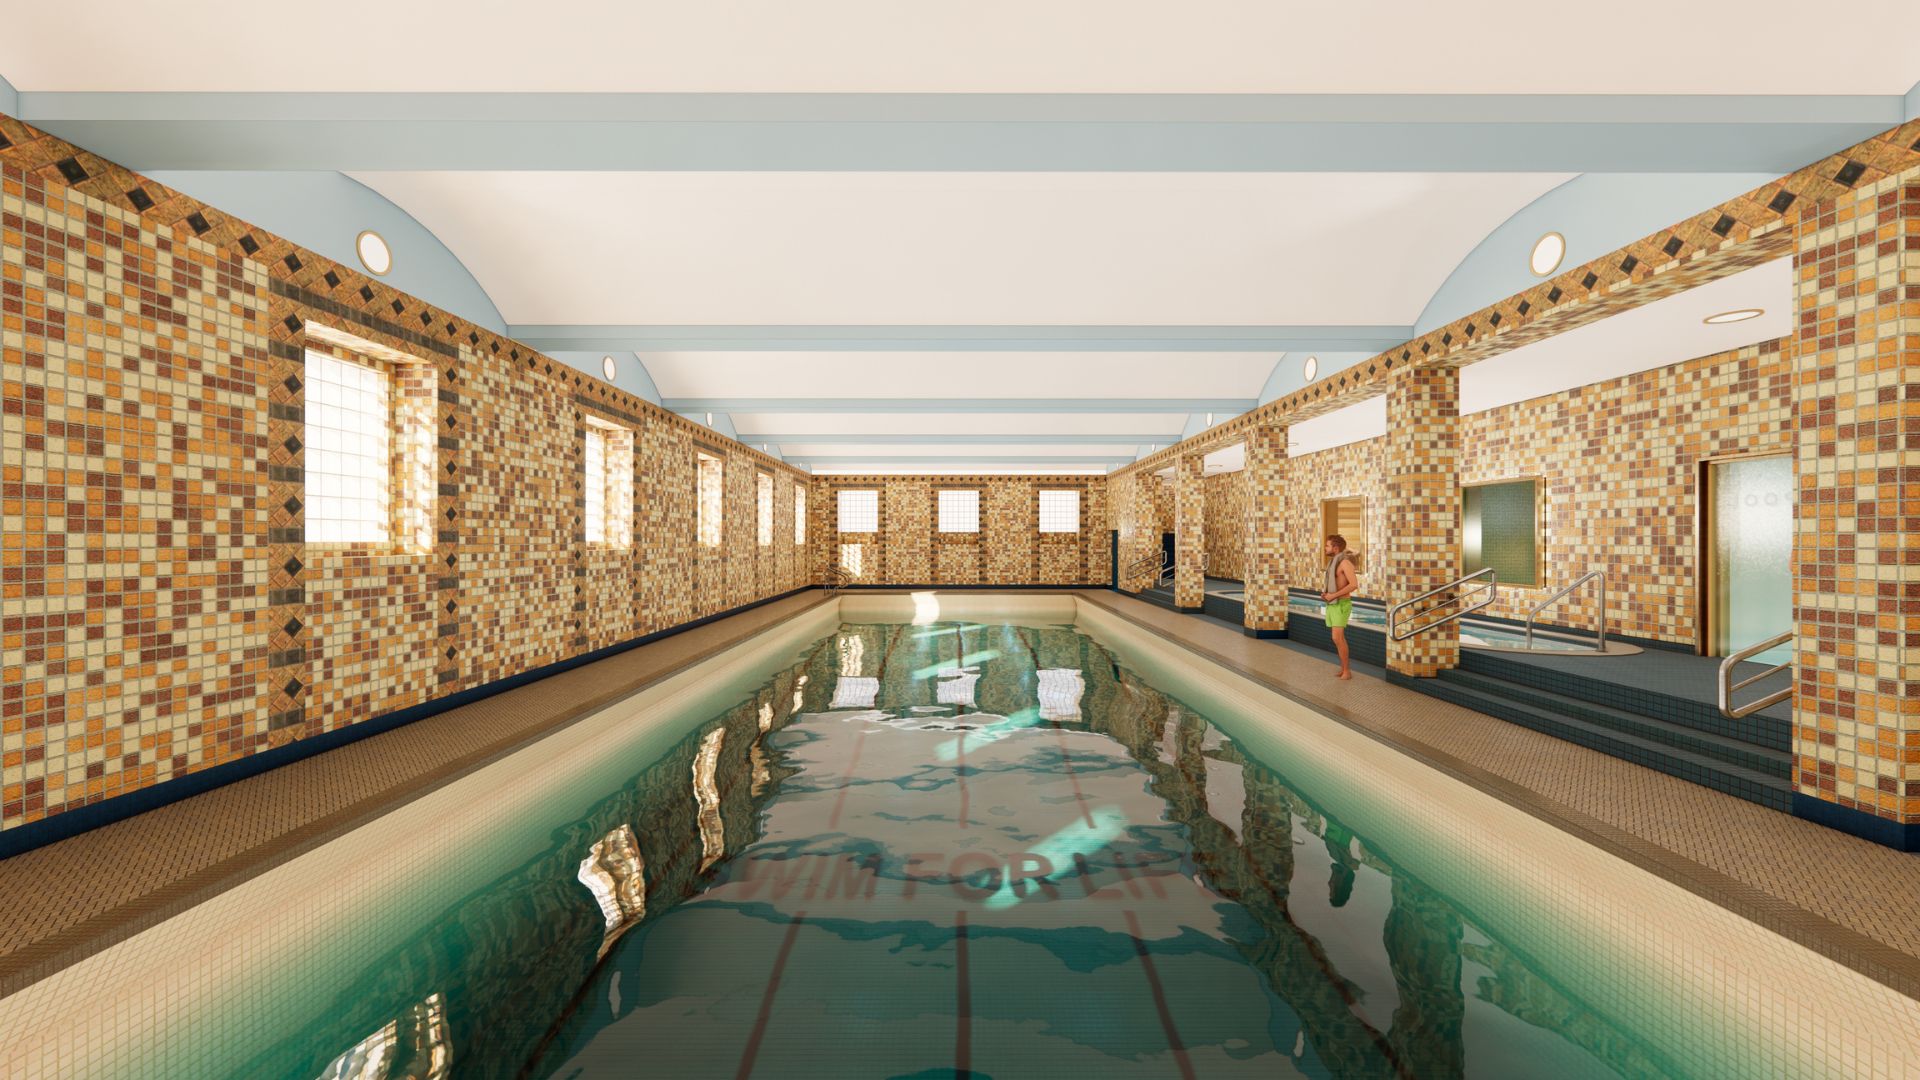 You can swim in the original lap pool from the YMCA at 21c Museum Hotel St. Louis.